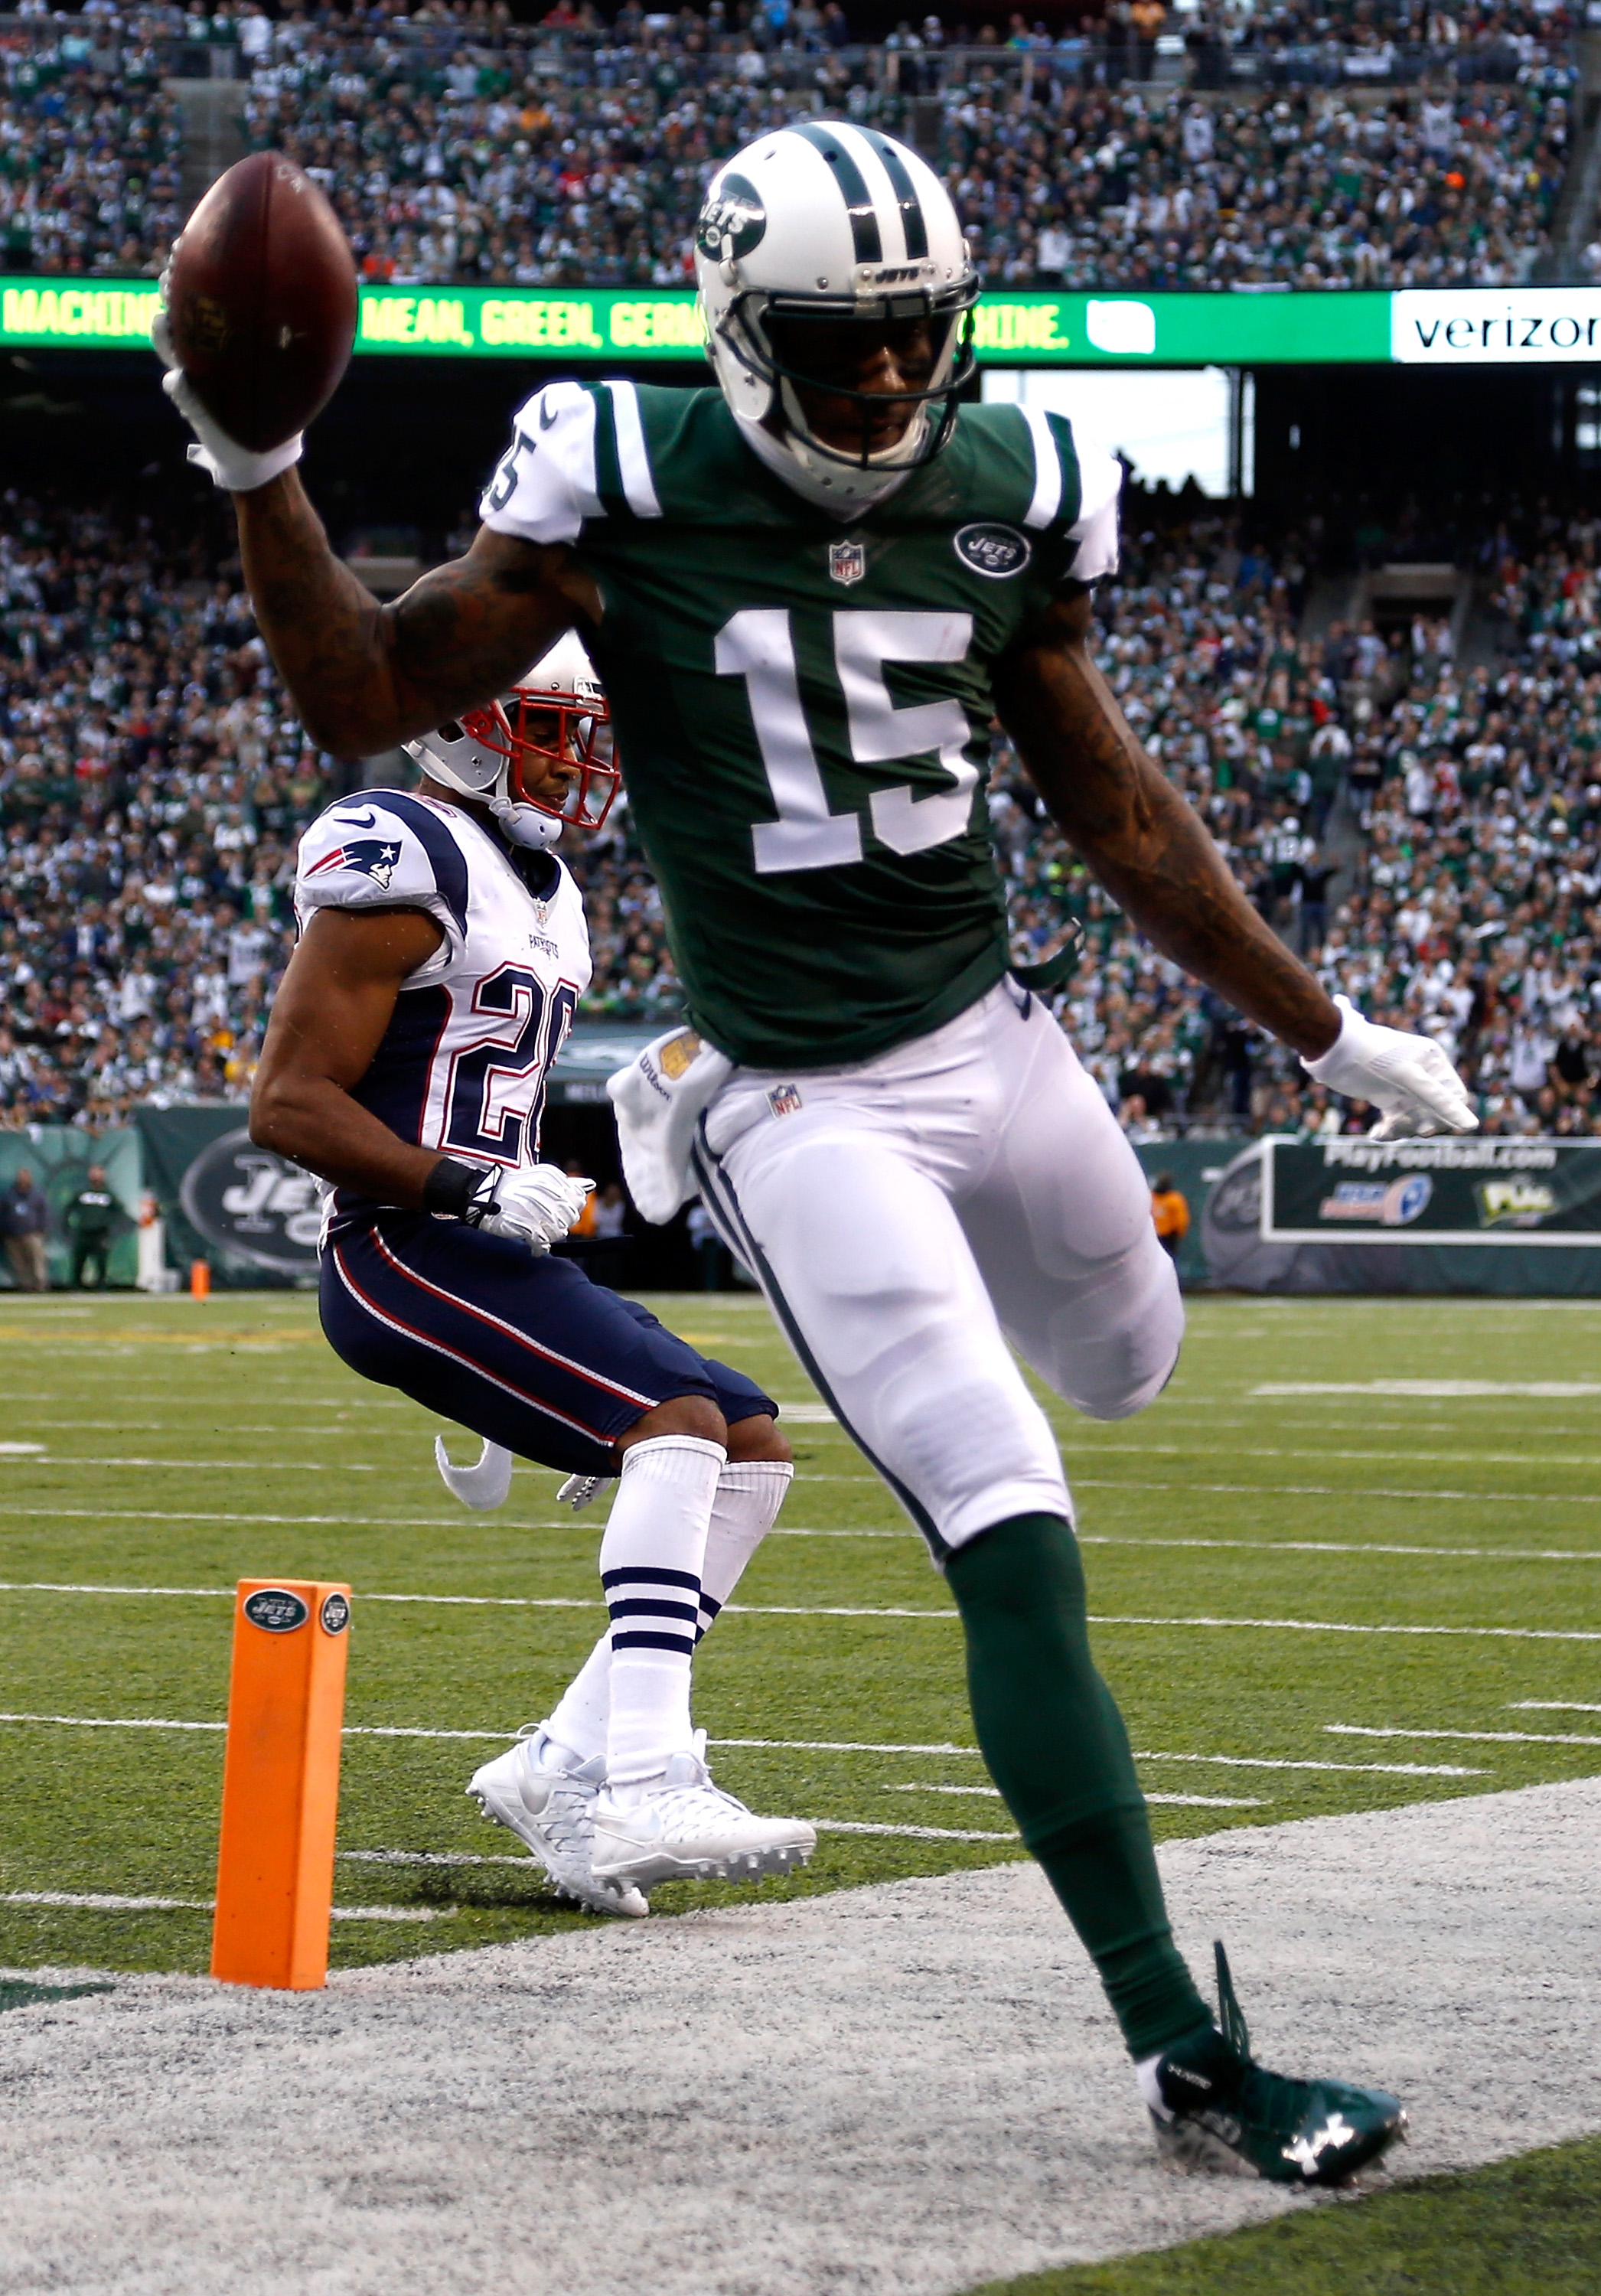 Brandon Marshall of the New York Jets scores a touchdown against the New England Patriots at MetLife Stadium on December 27, 2015. (Photo by Jeff Zelevansky/Getty Images)